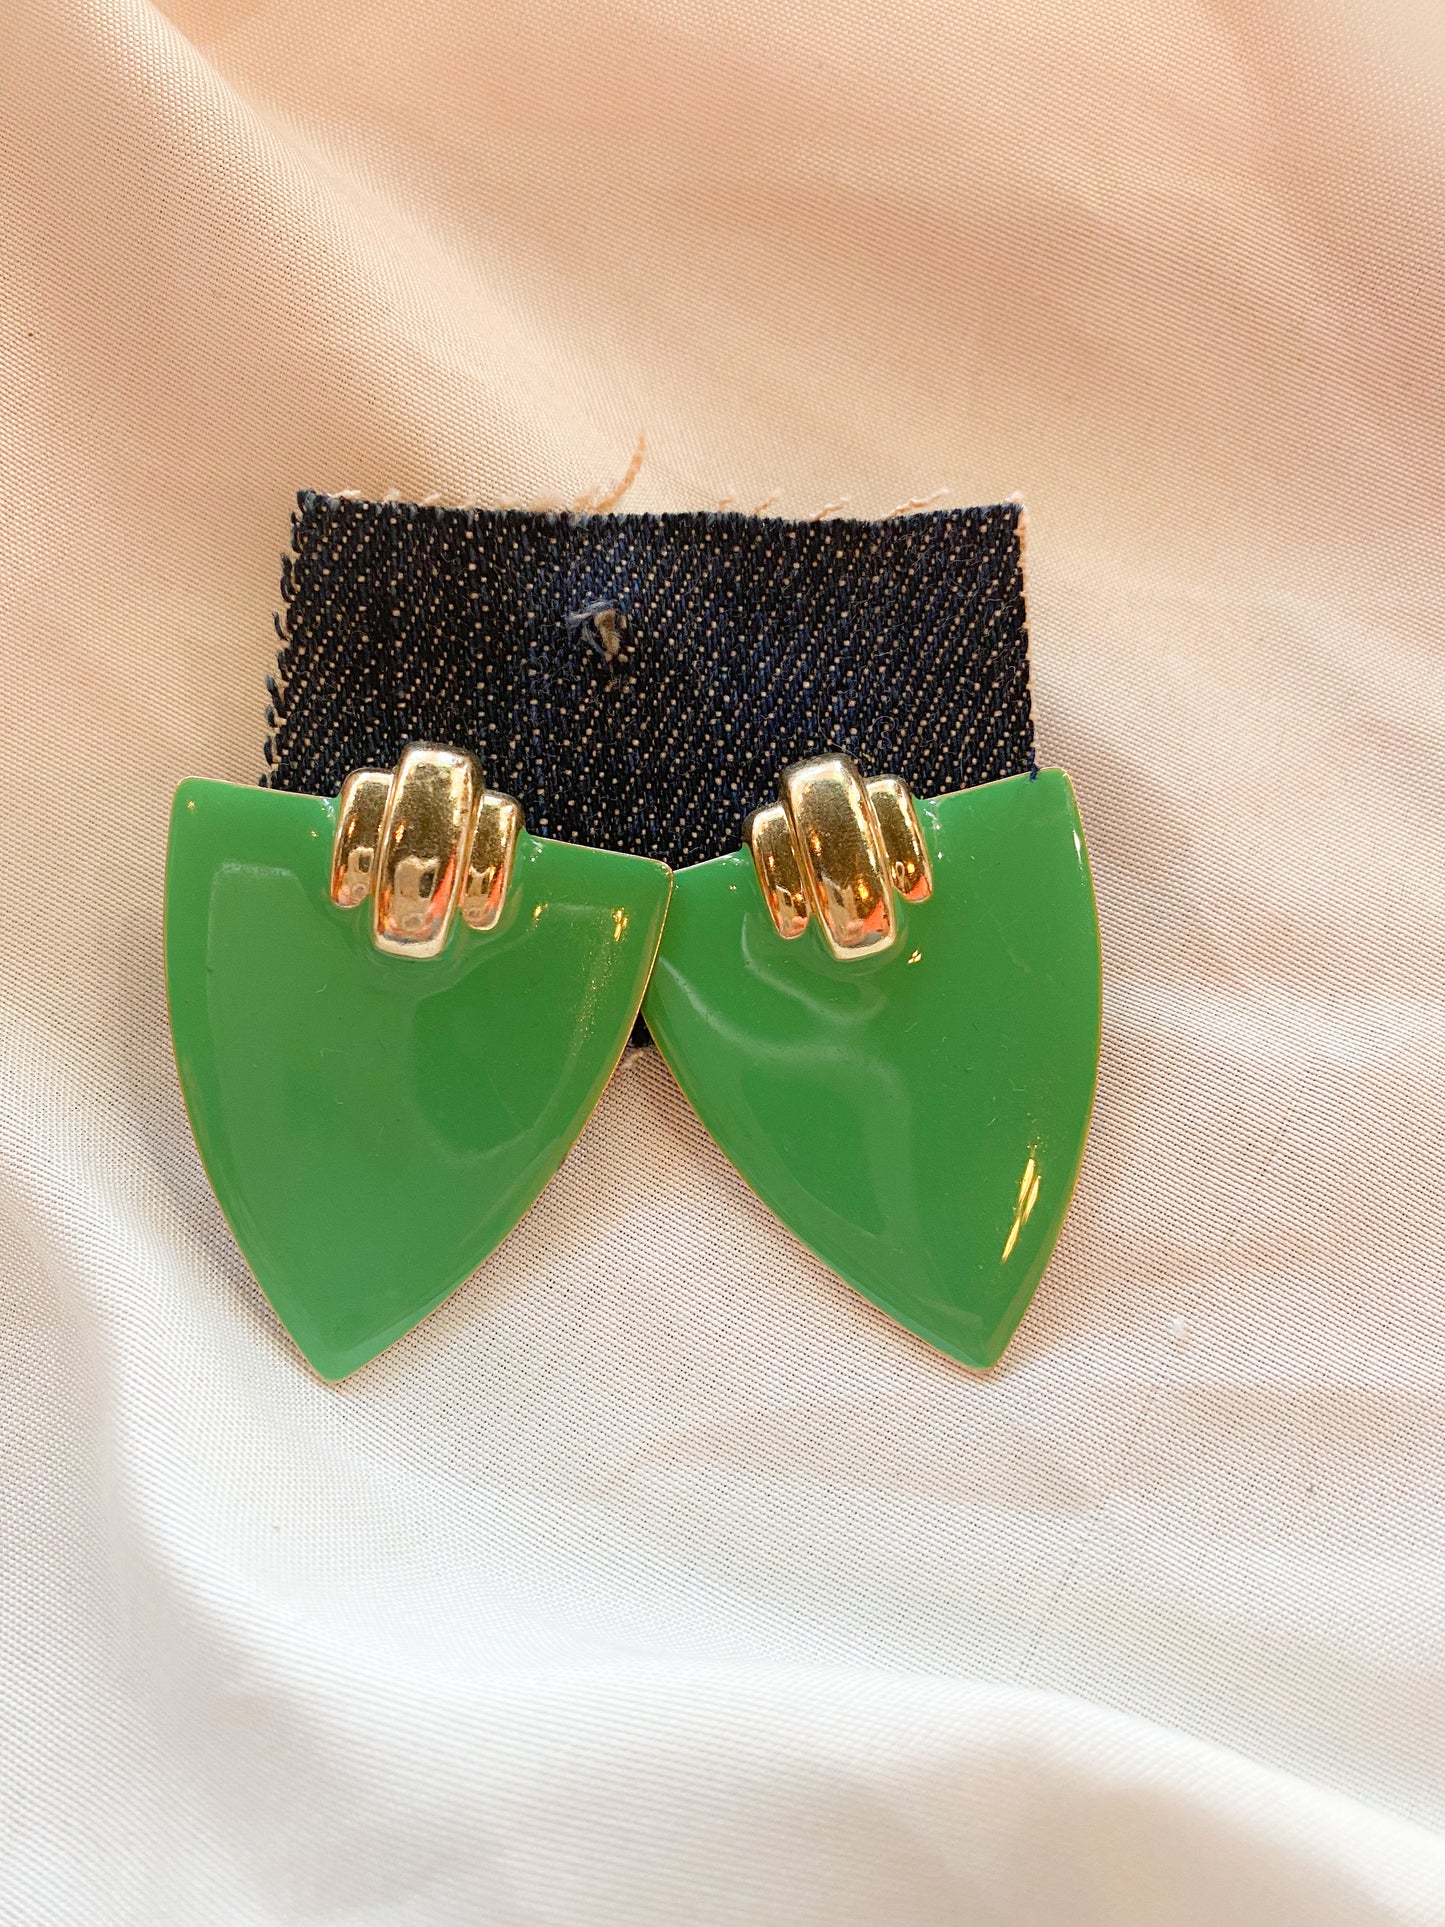 Vintage green and gold triangle post earrings